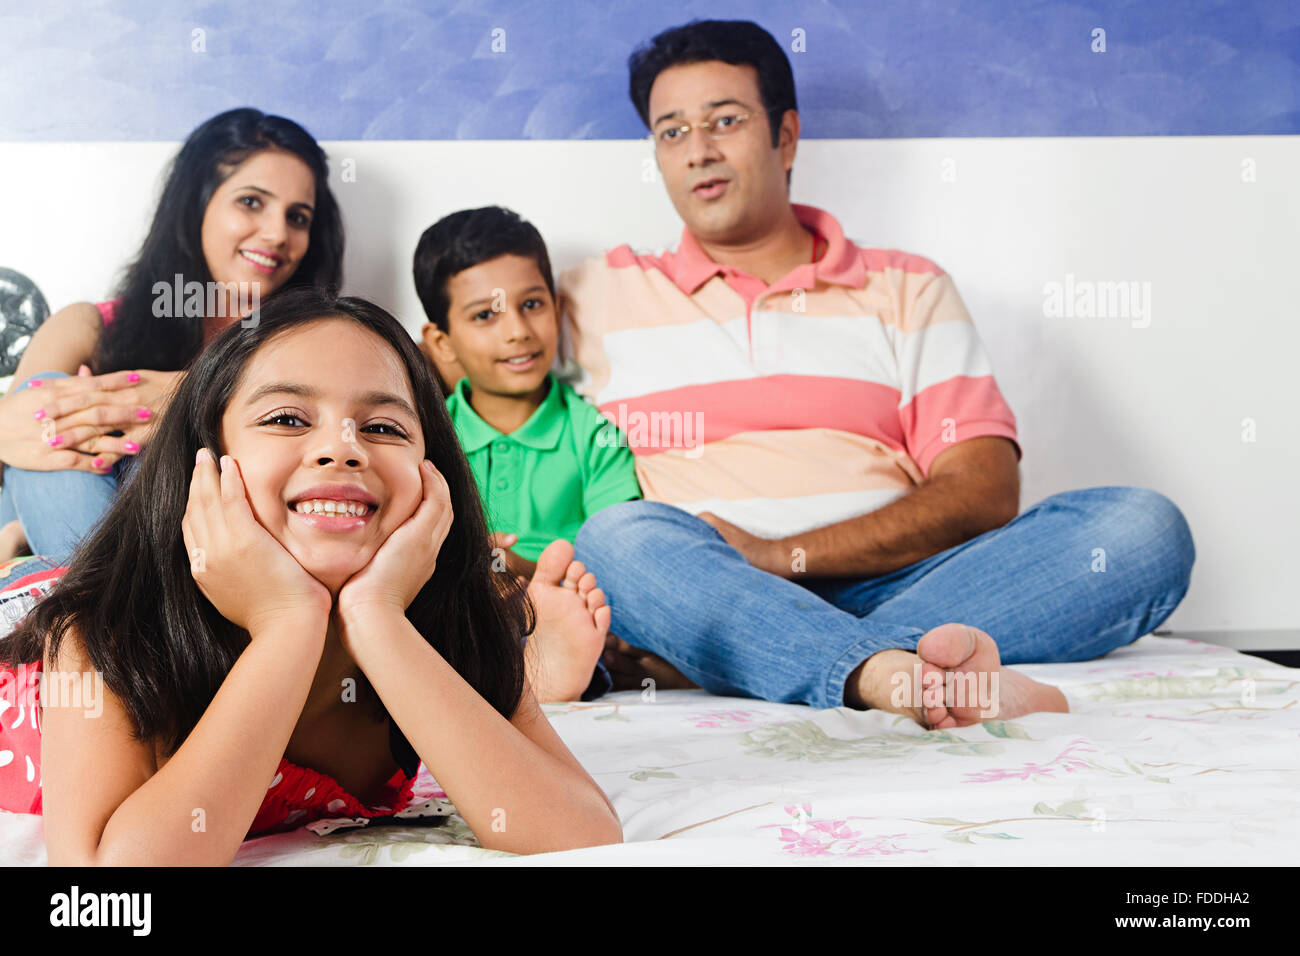 4 People Parents and Kid Bedroom Lying Down Relaxation Stock Photo